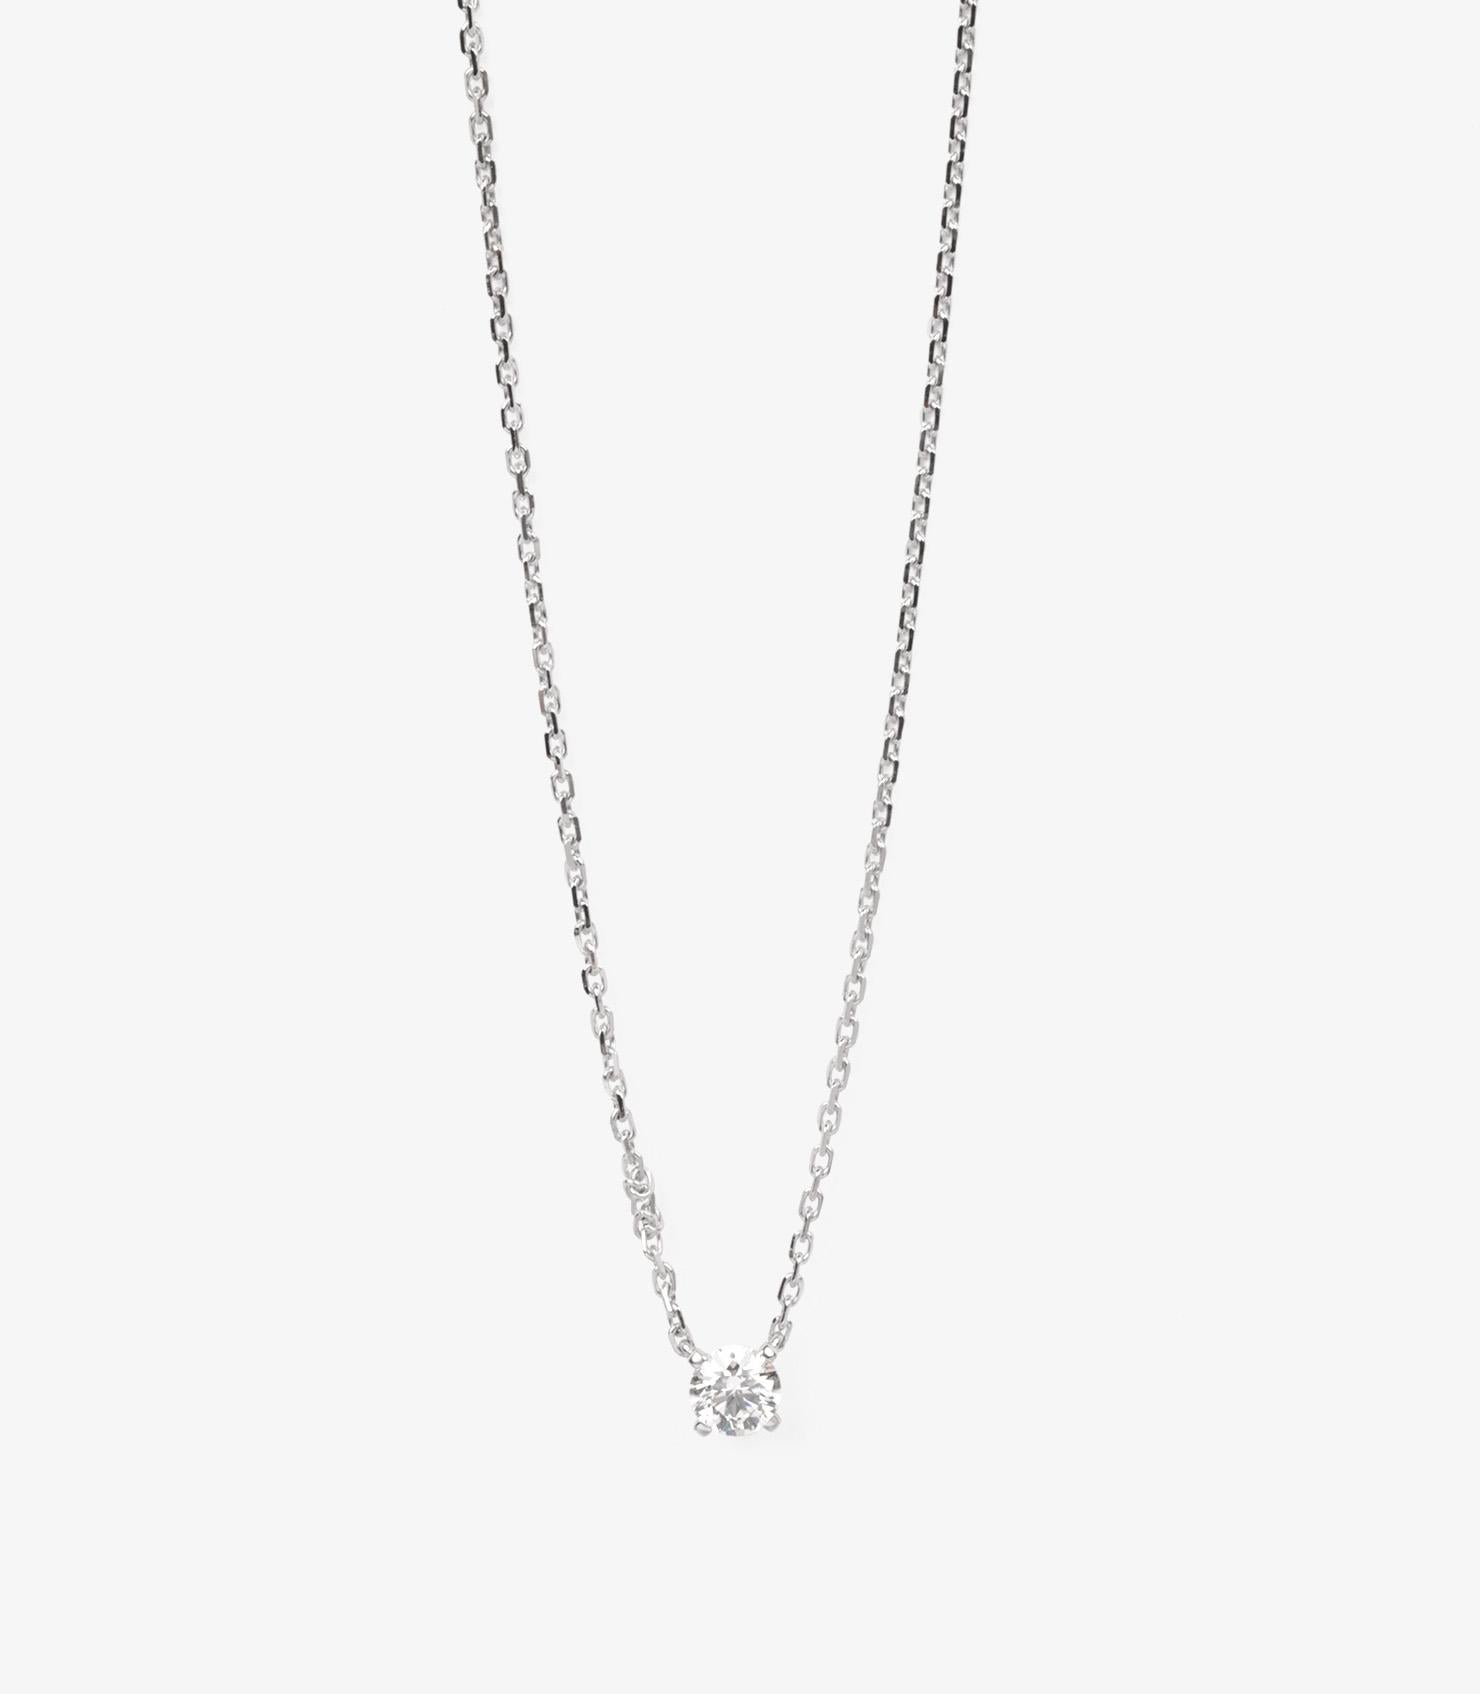 Cartier Brilliant Cut 0.21ct Diamond 18ct White Gold 1895 Necklace

Brand- Cartier
Model- 1895 Diamond Necklace
Product Type- Necklace
Serial Number- LQ****
Age- Circa 2022
Accompanied By- Cartier Box, Certificate, GIA Diamond